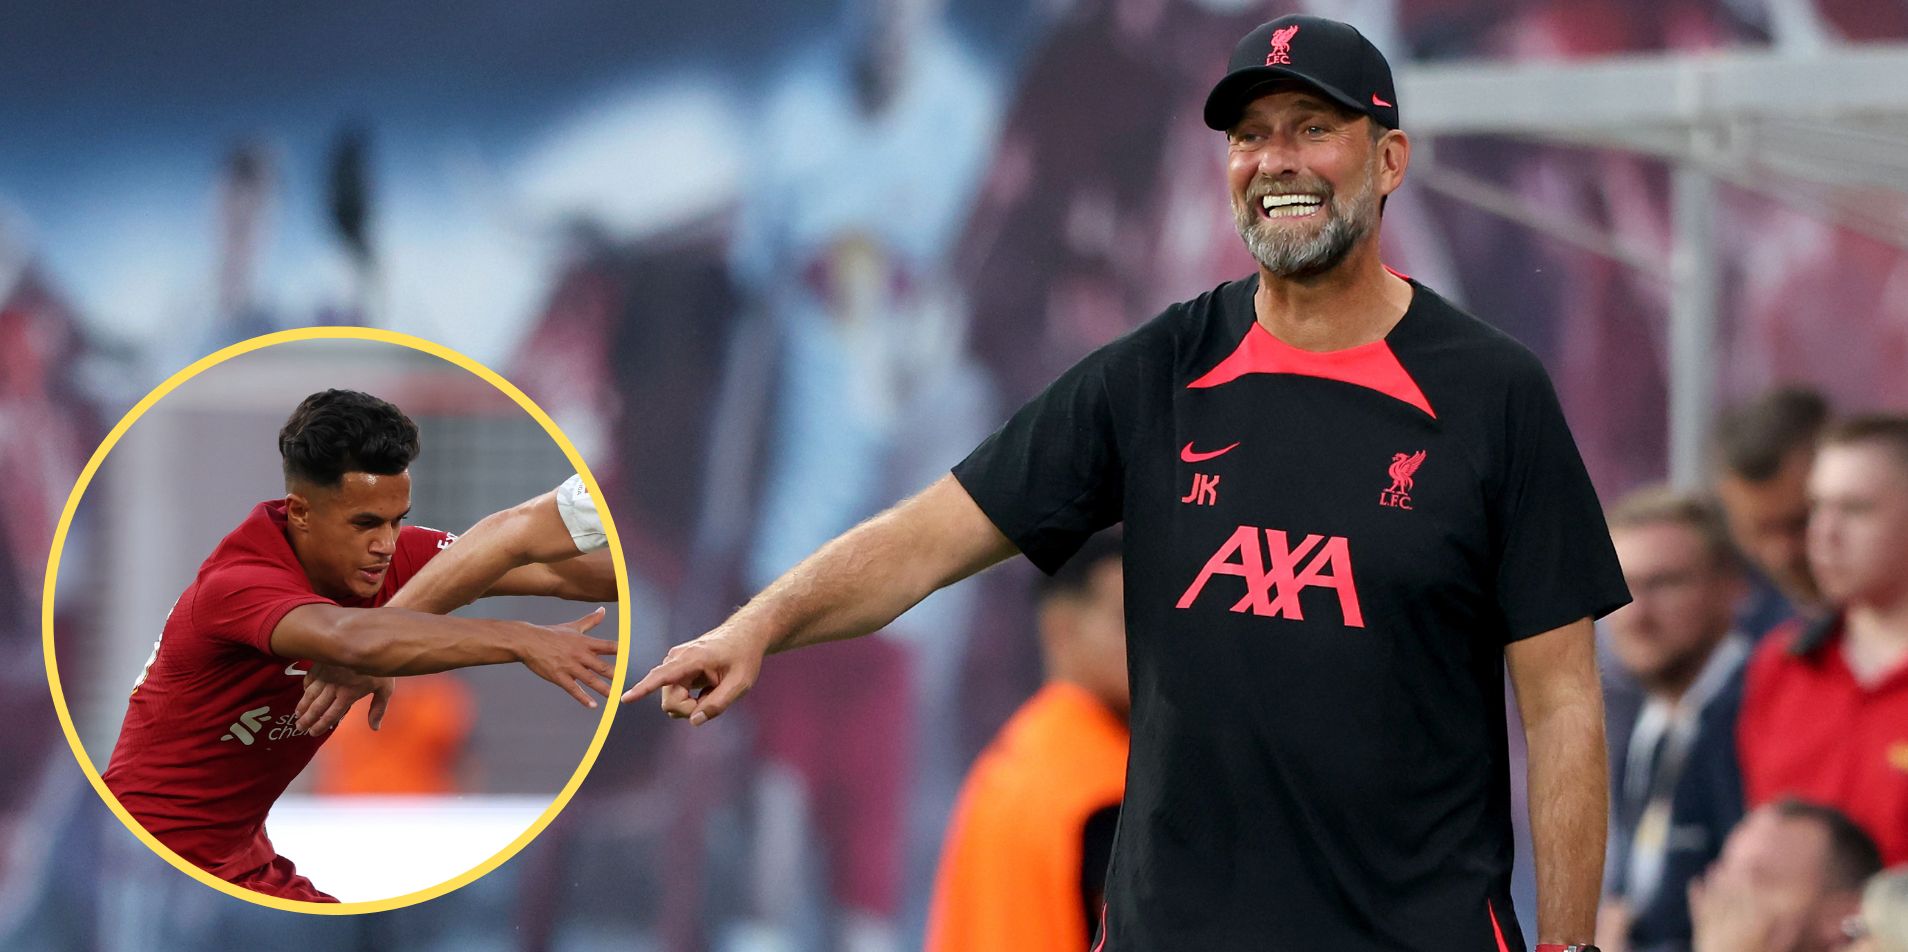 Klopp hints he’ll gamble on teenage Liverpool star early on after impressive pre-season: ‘We’ll have a lot of fun with him’